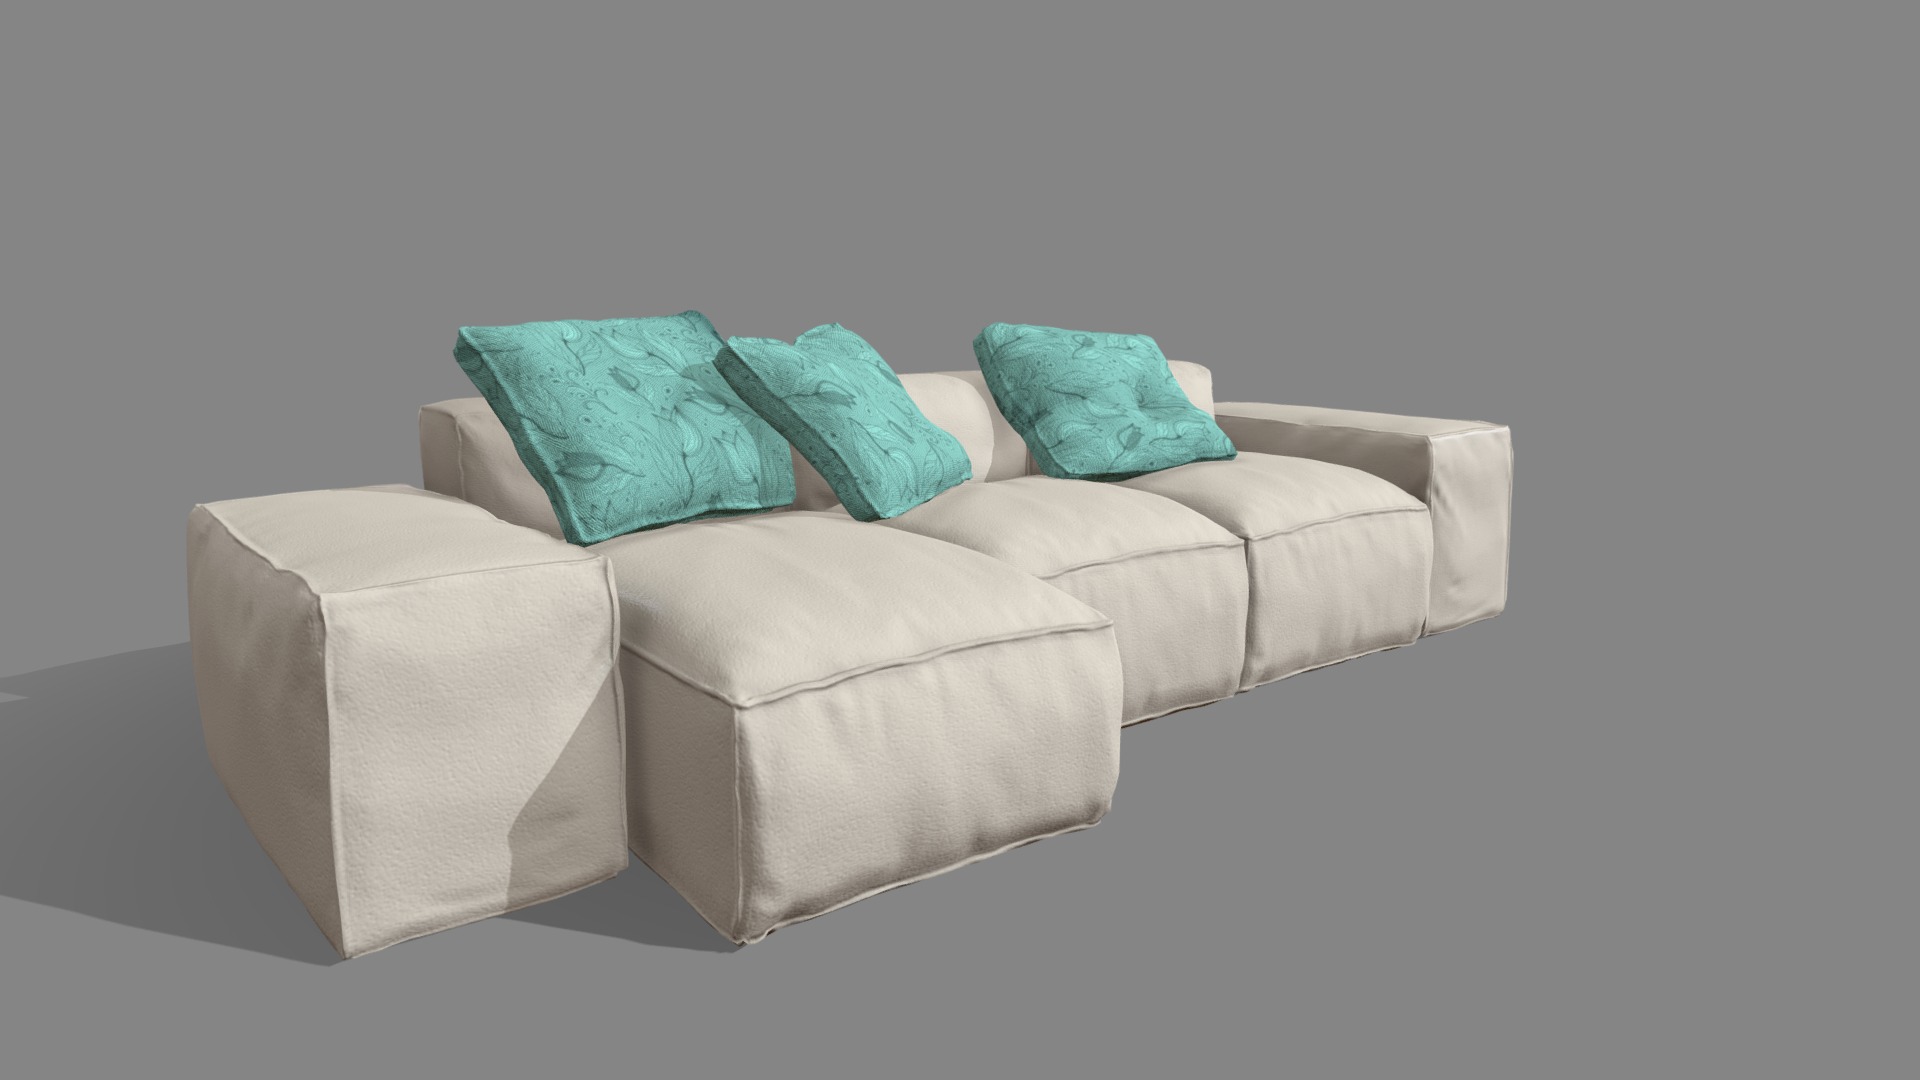 3D model Big Sofa Woody - This is a 3D model of the Big Sofa Woody. The 3D model is about a couch with pillows.